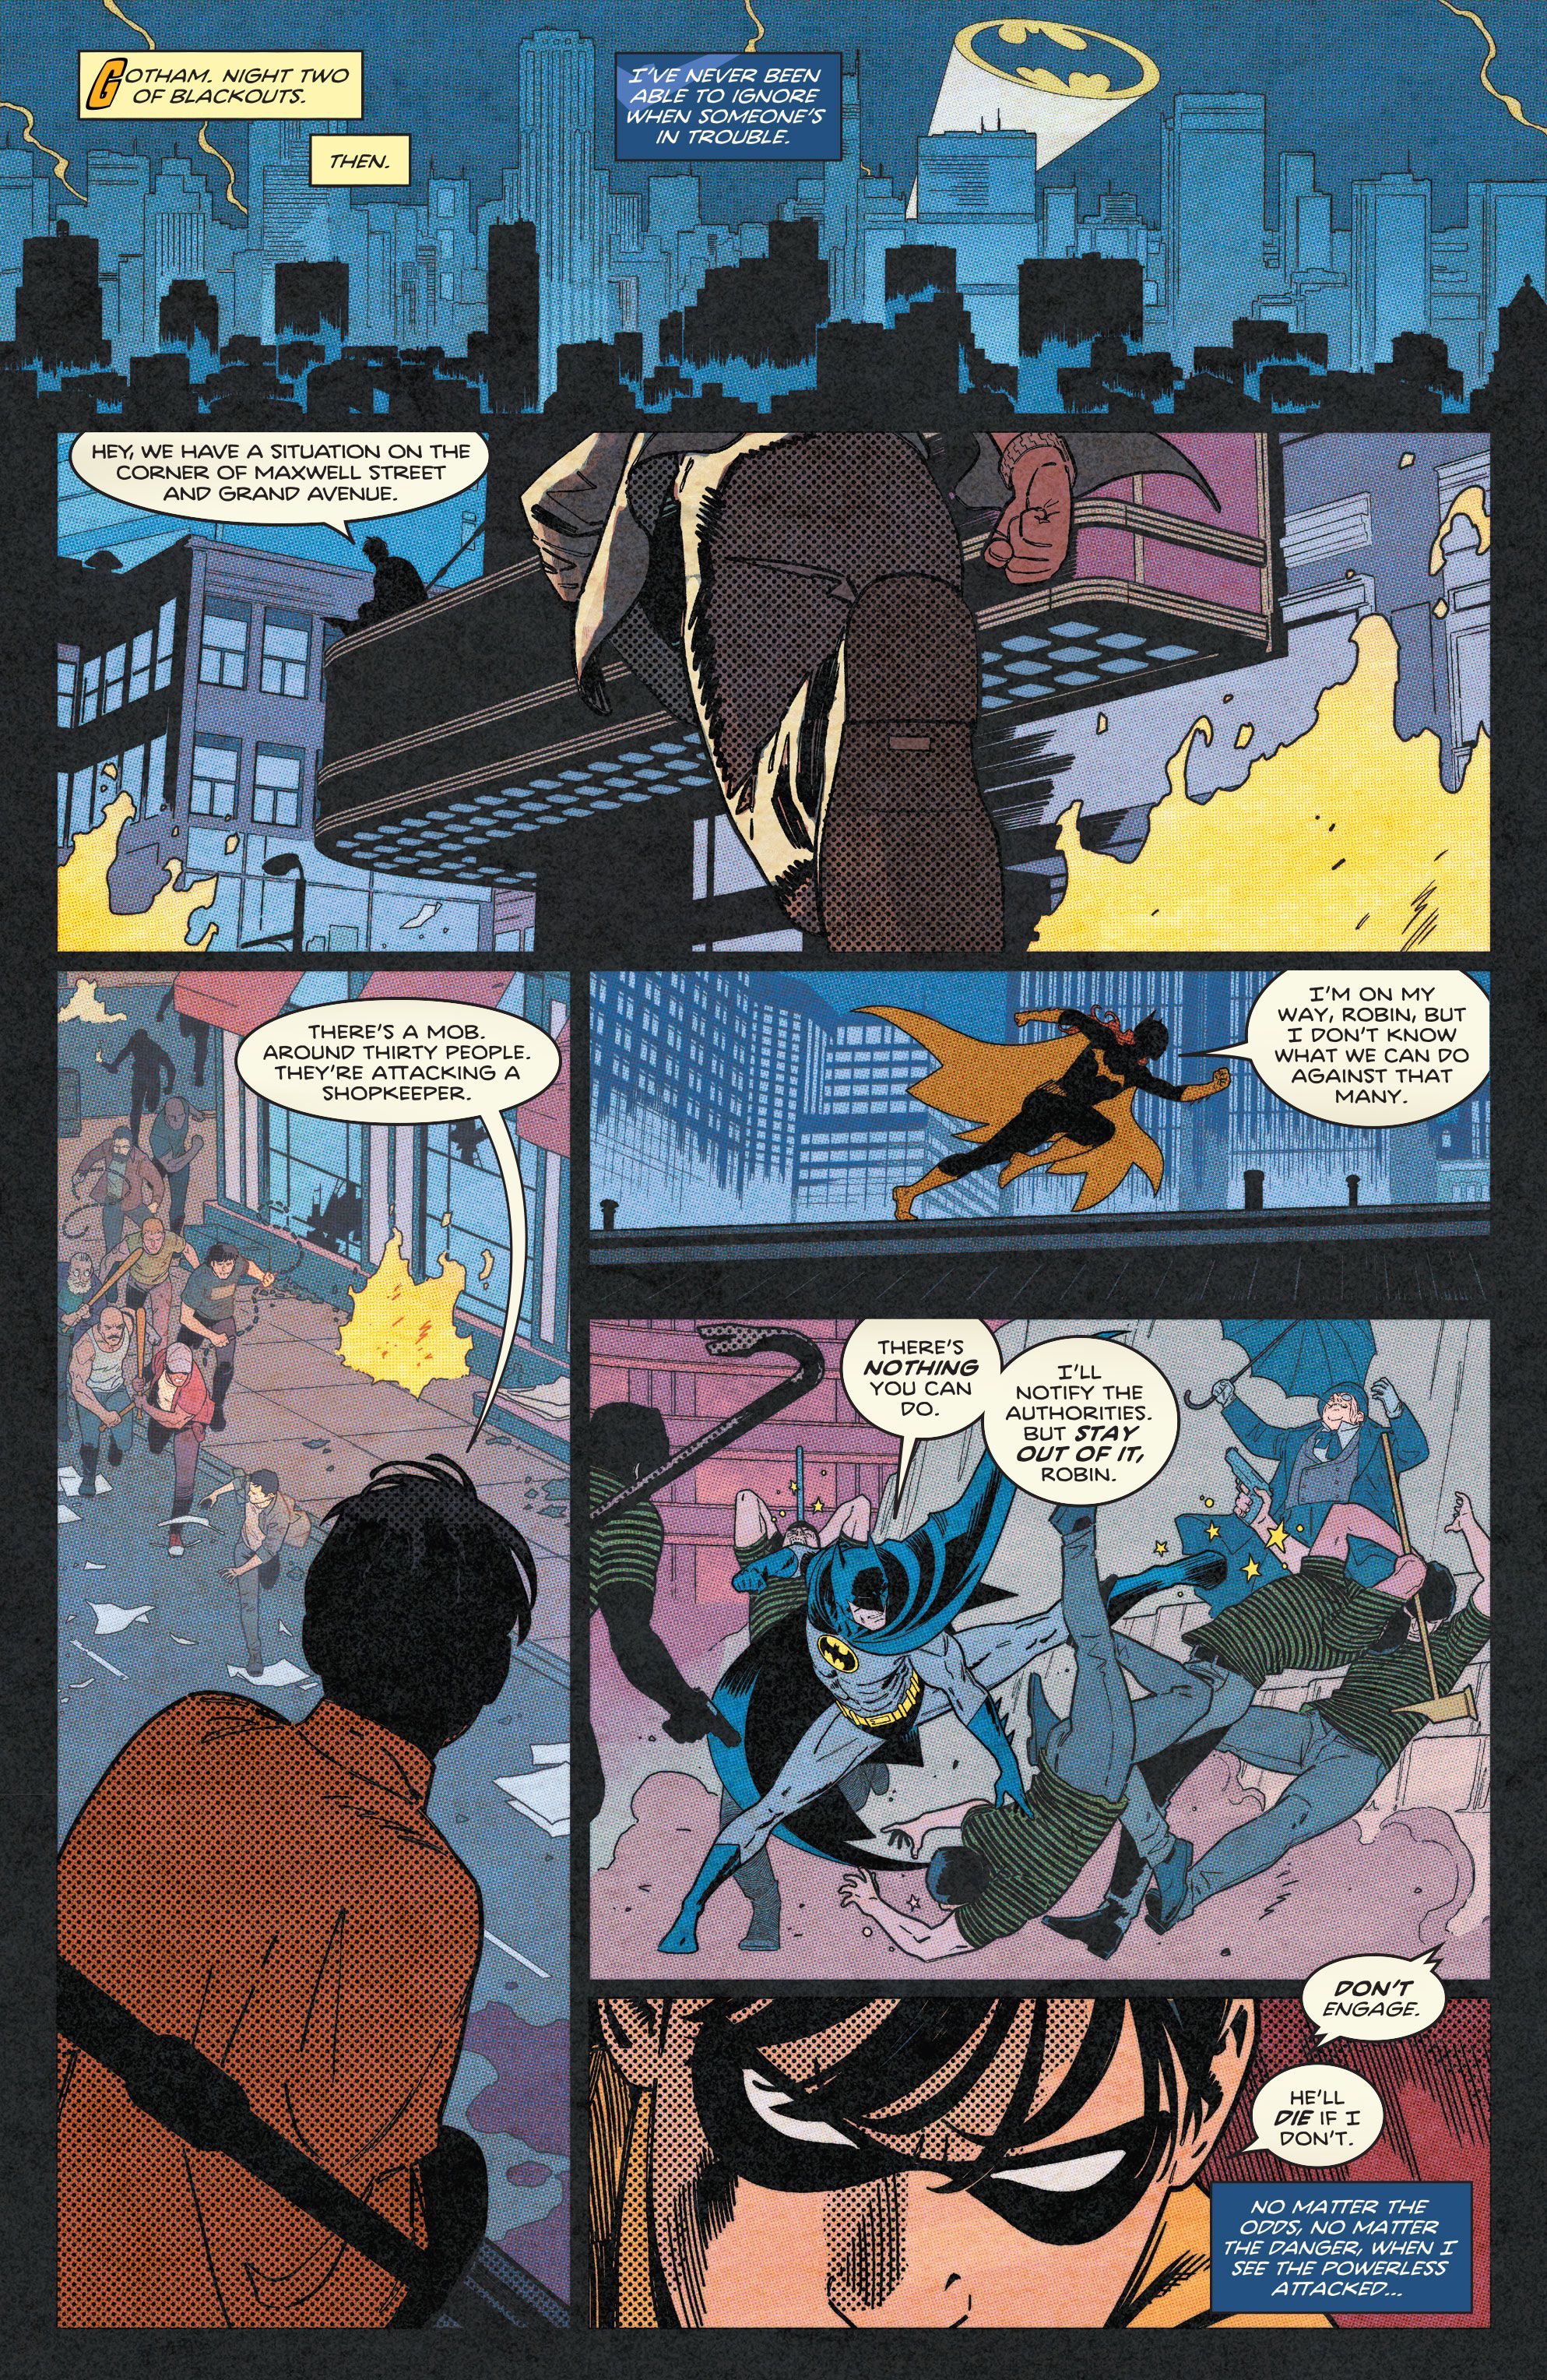 Nightwing 92 Preview A